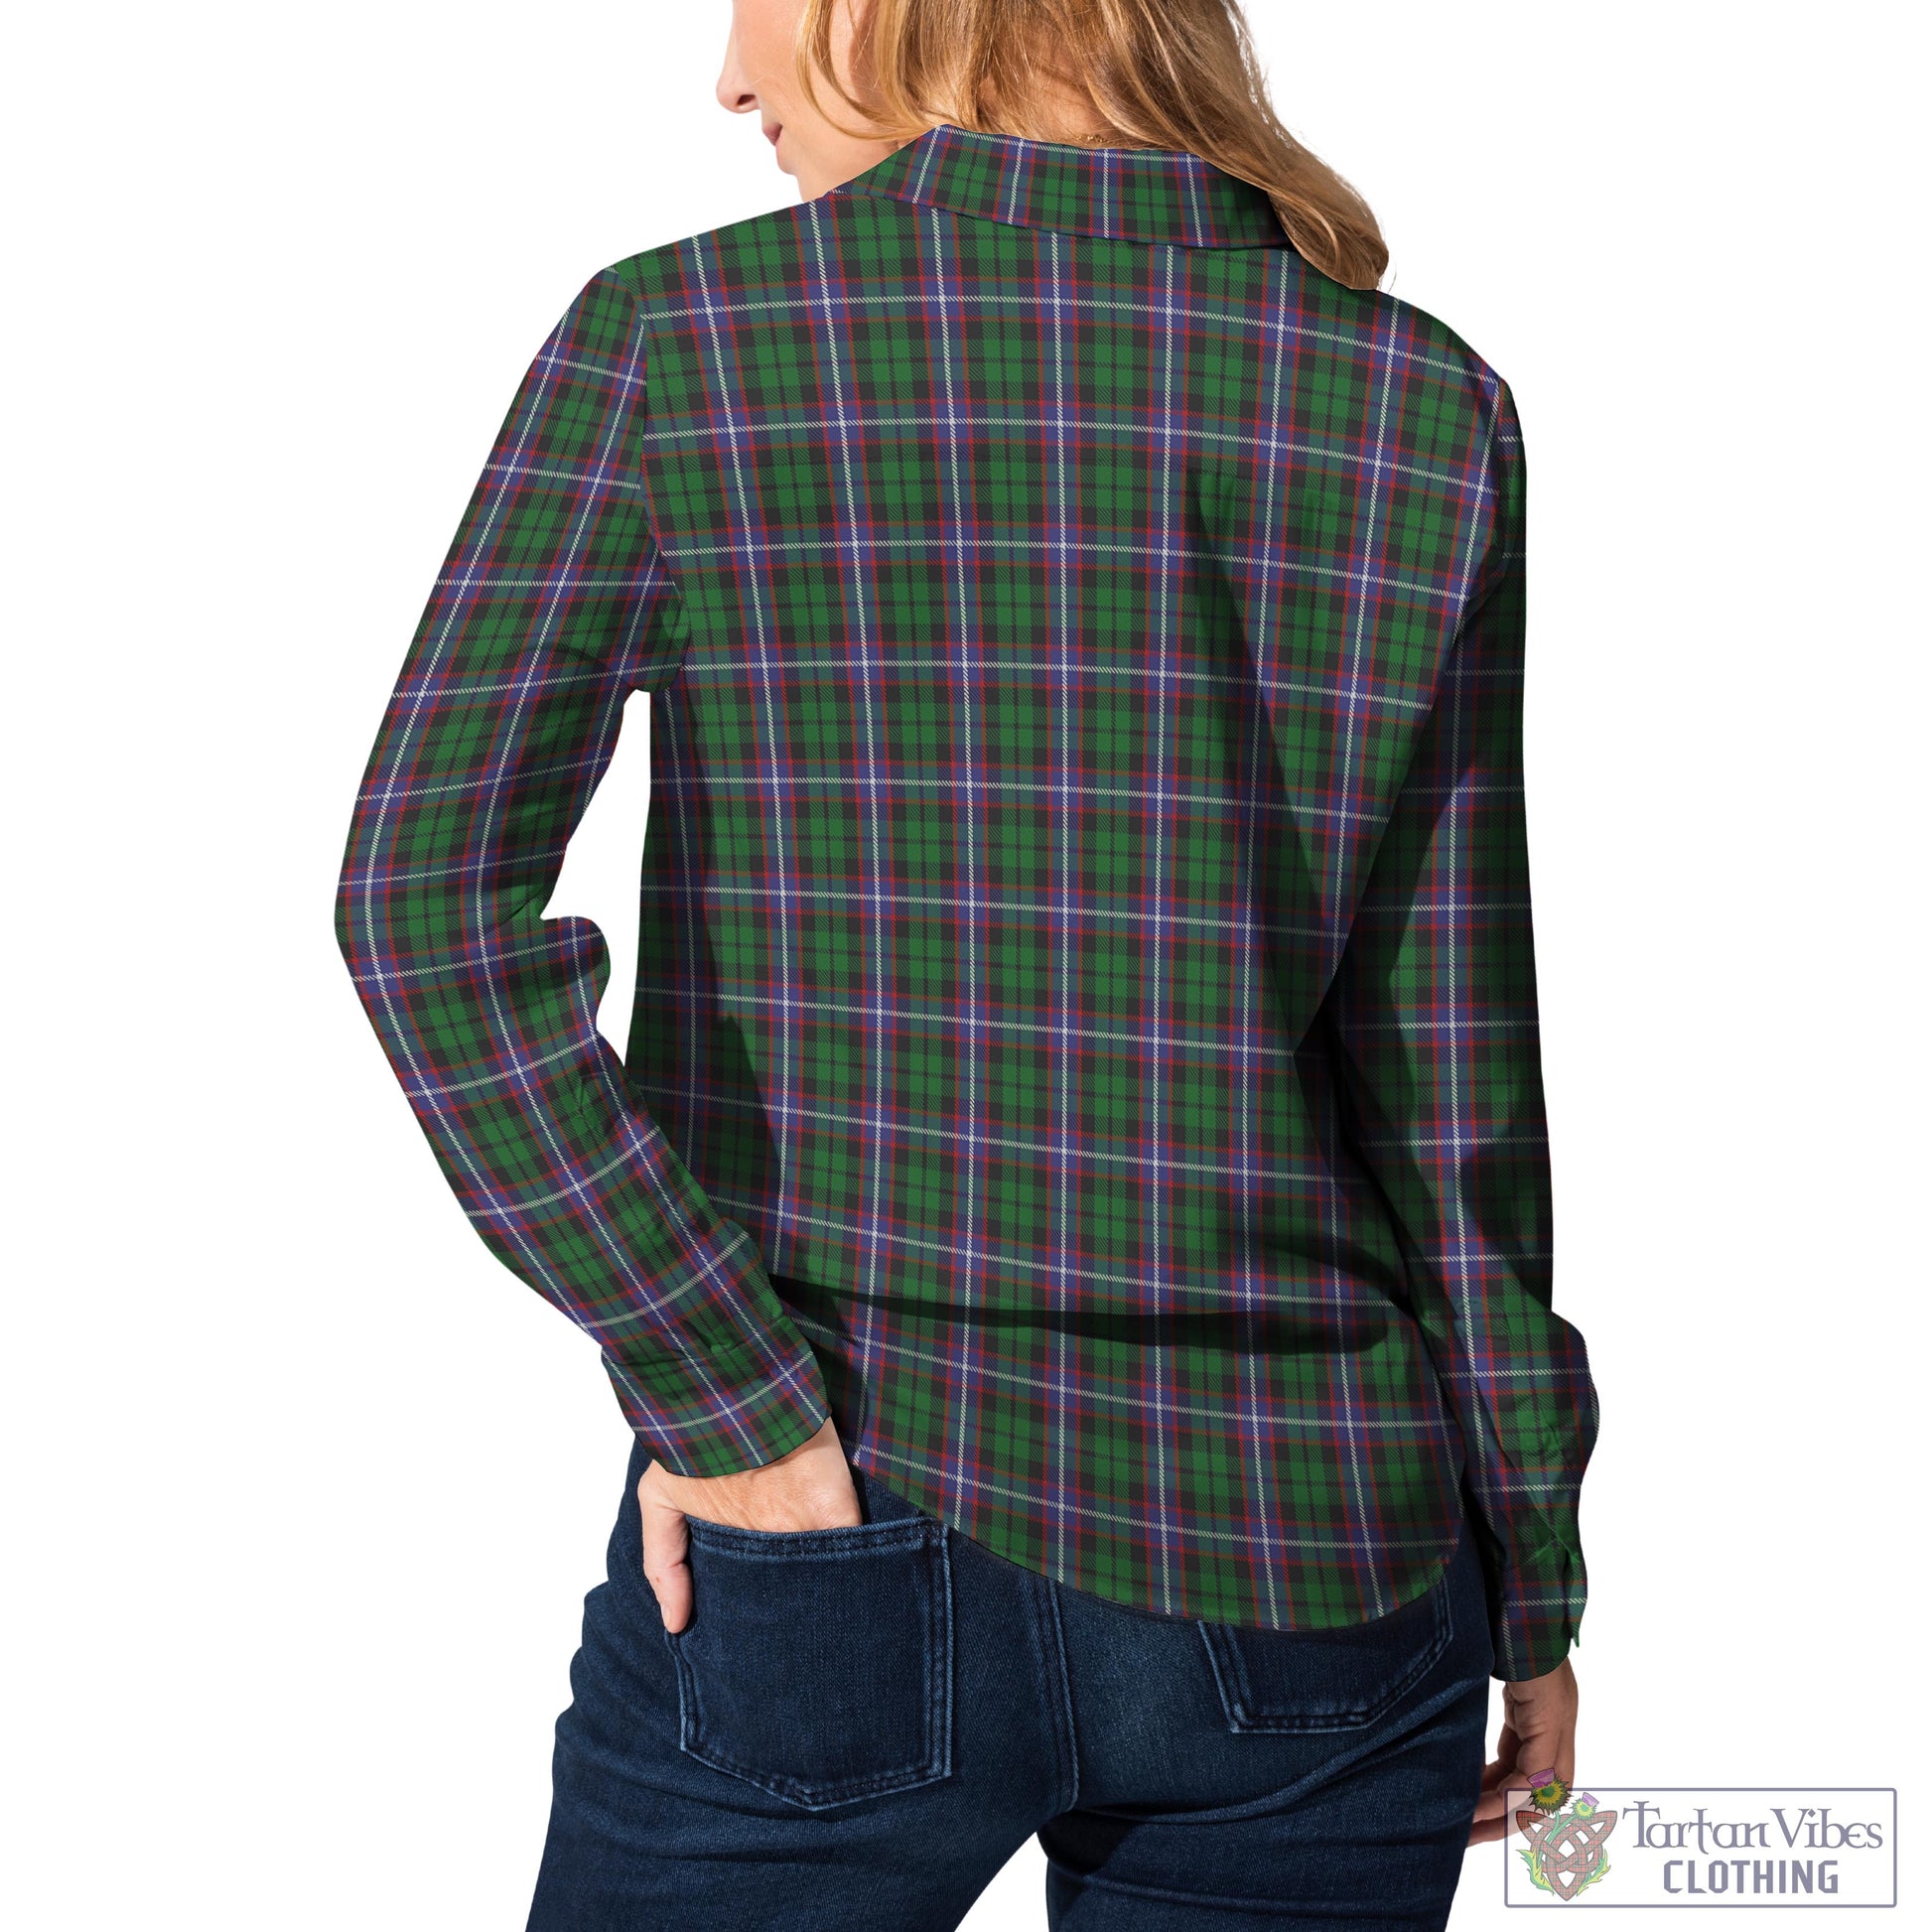 Tartan Vibes Clothing Russell Tartan Womens Casual Shirt with Family Crest